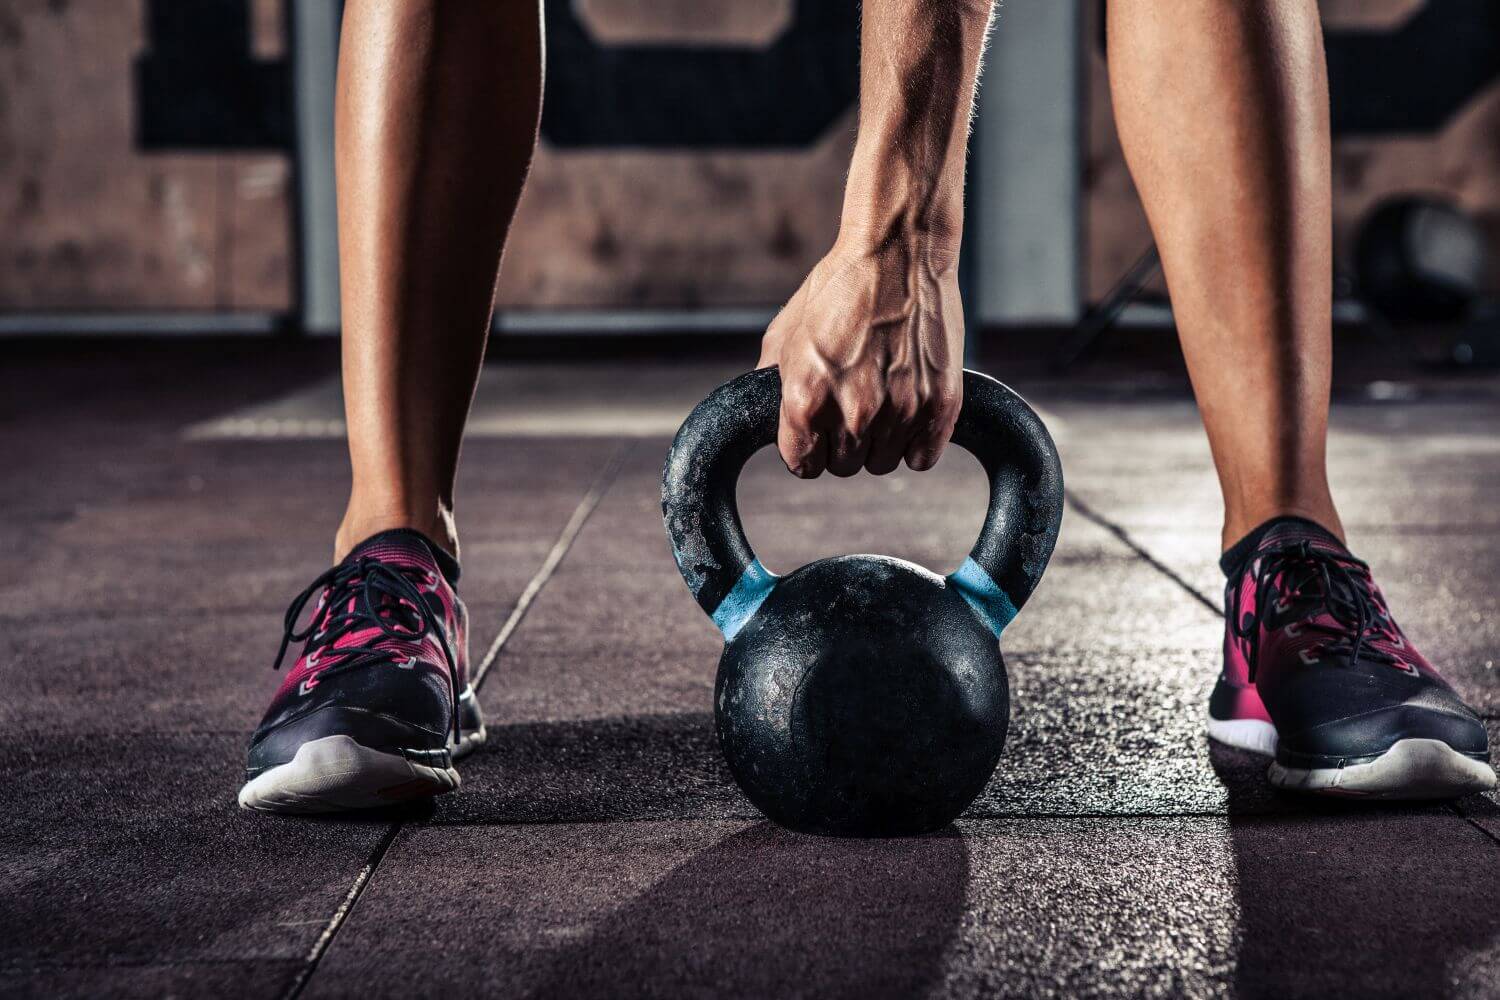 The Biggest Misconceptions About Strength Training